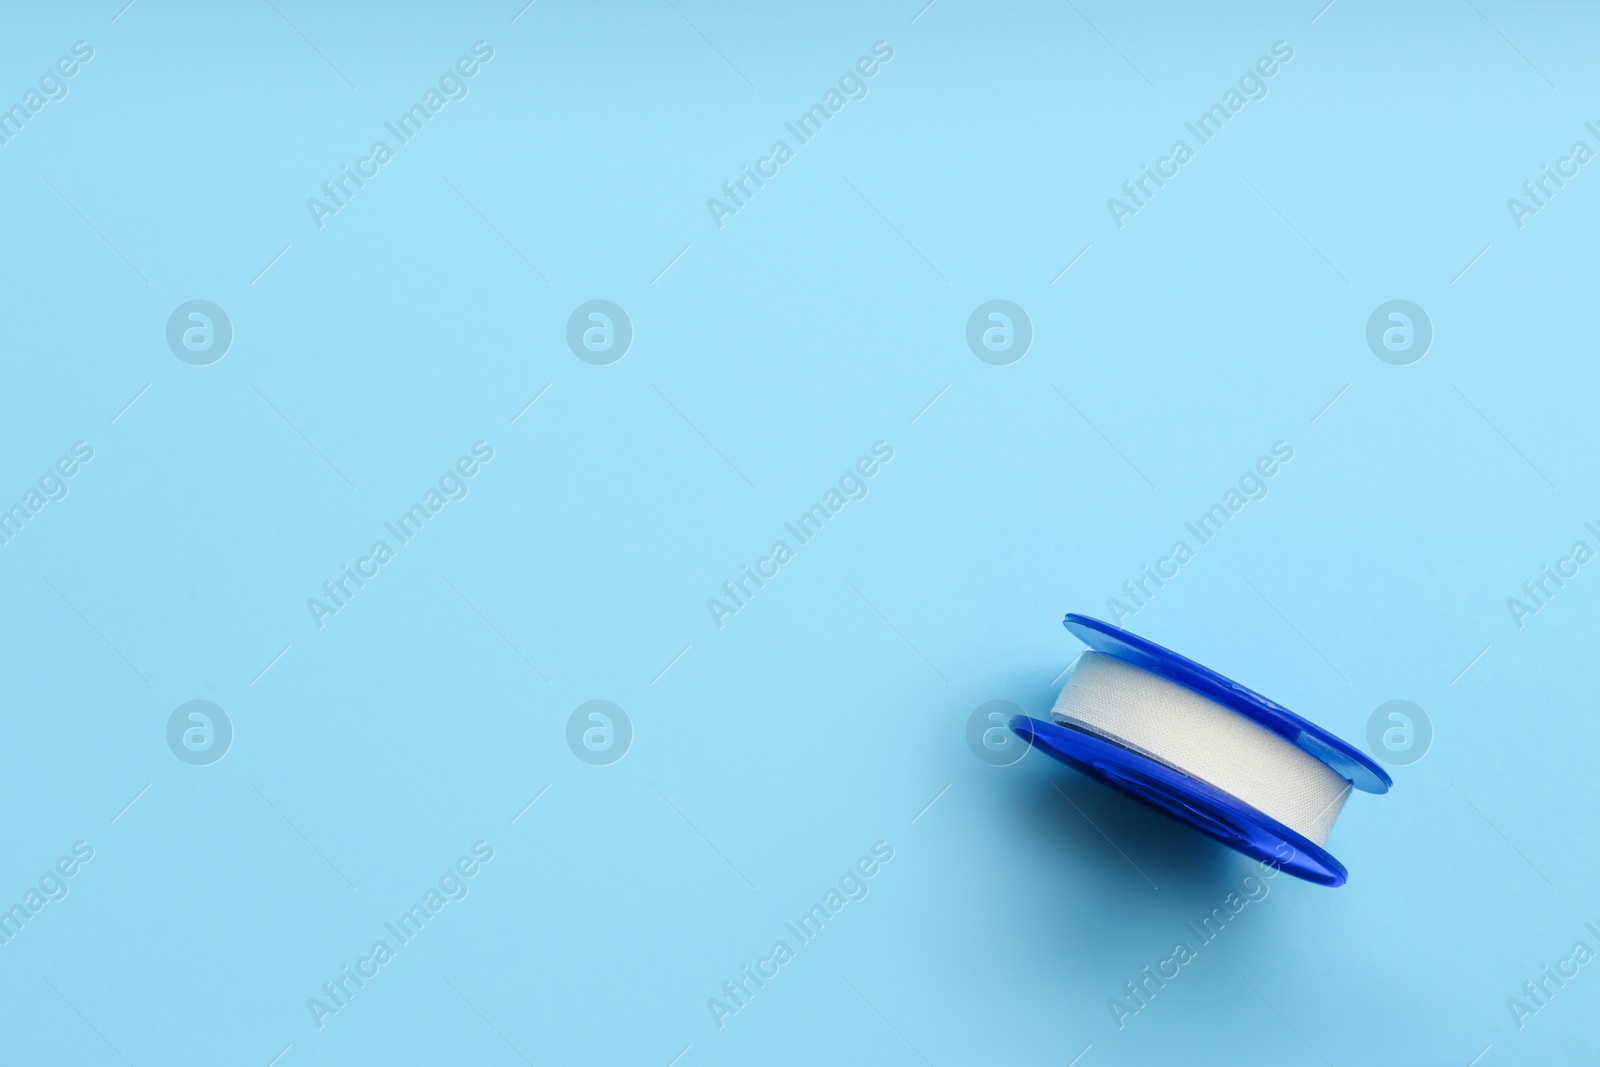 Photo of Sticking plaster roll on light blue background, top view. Space for text